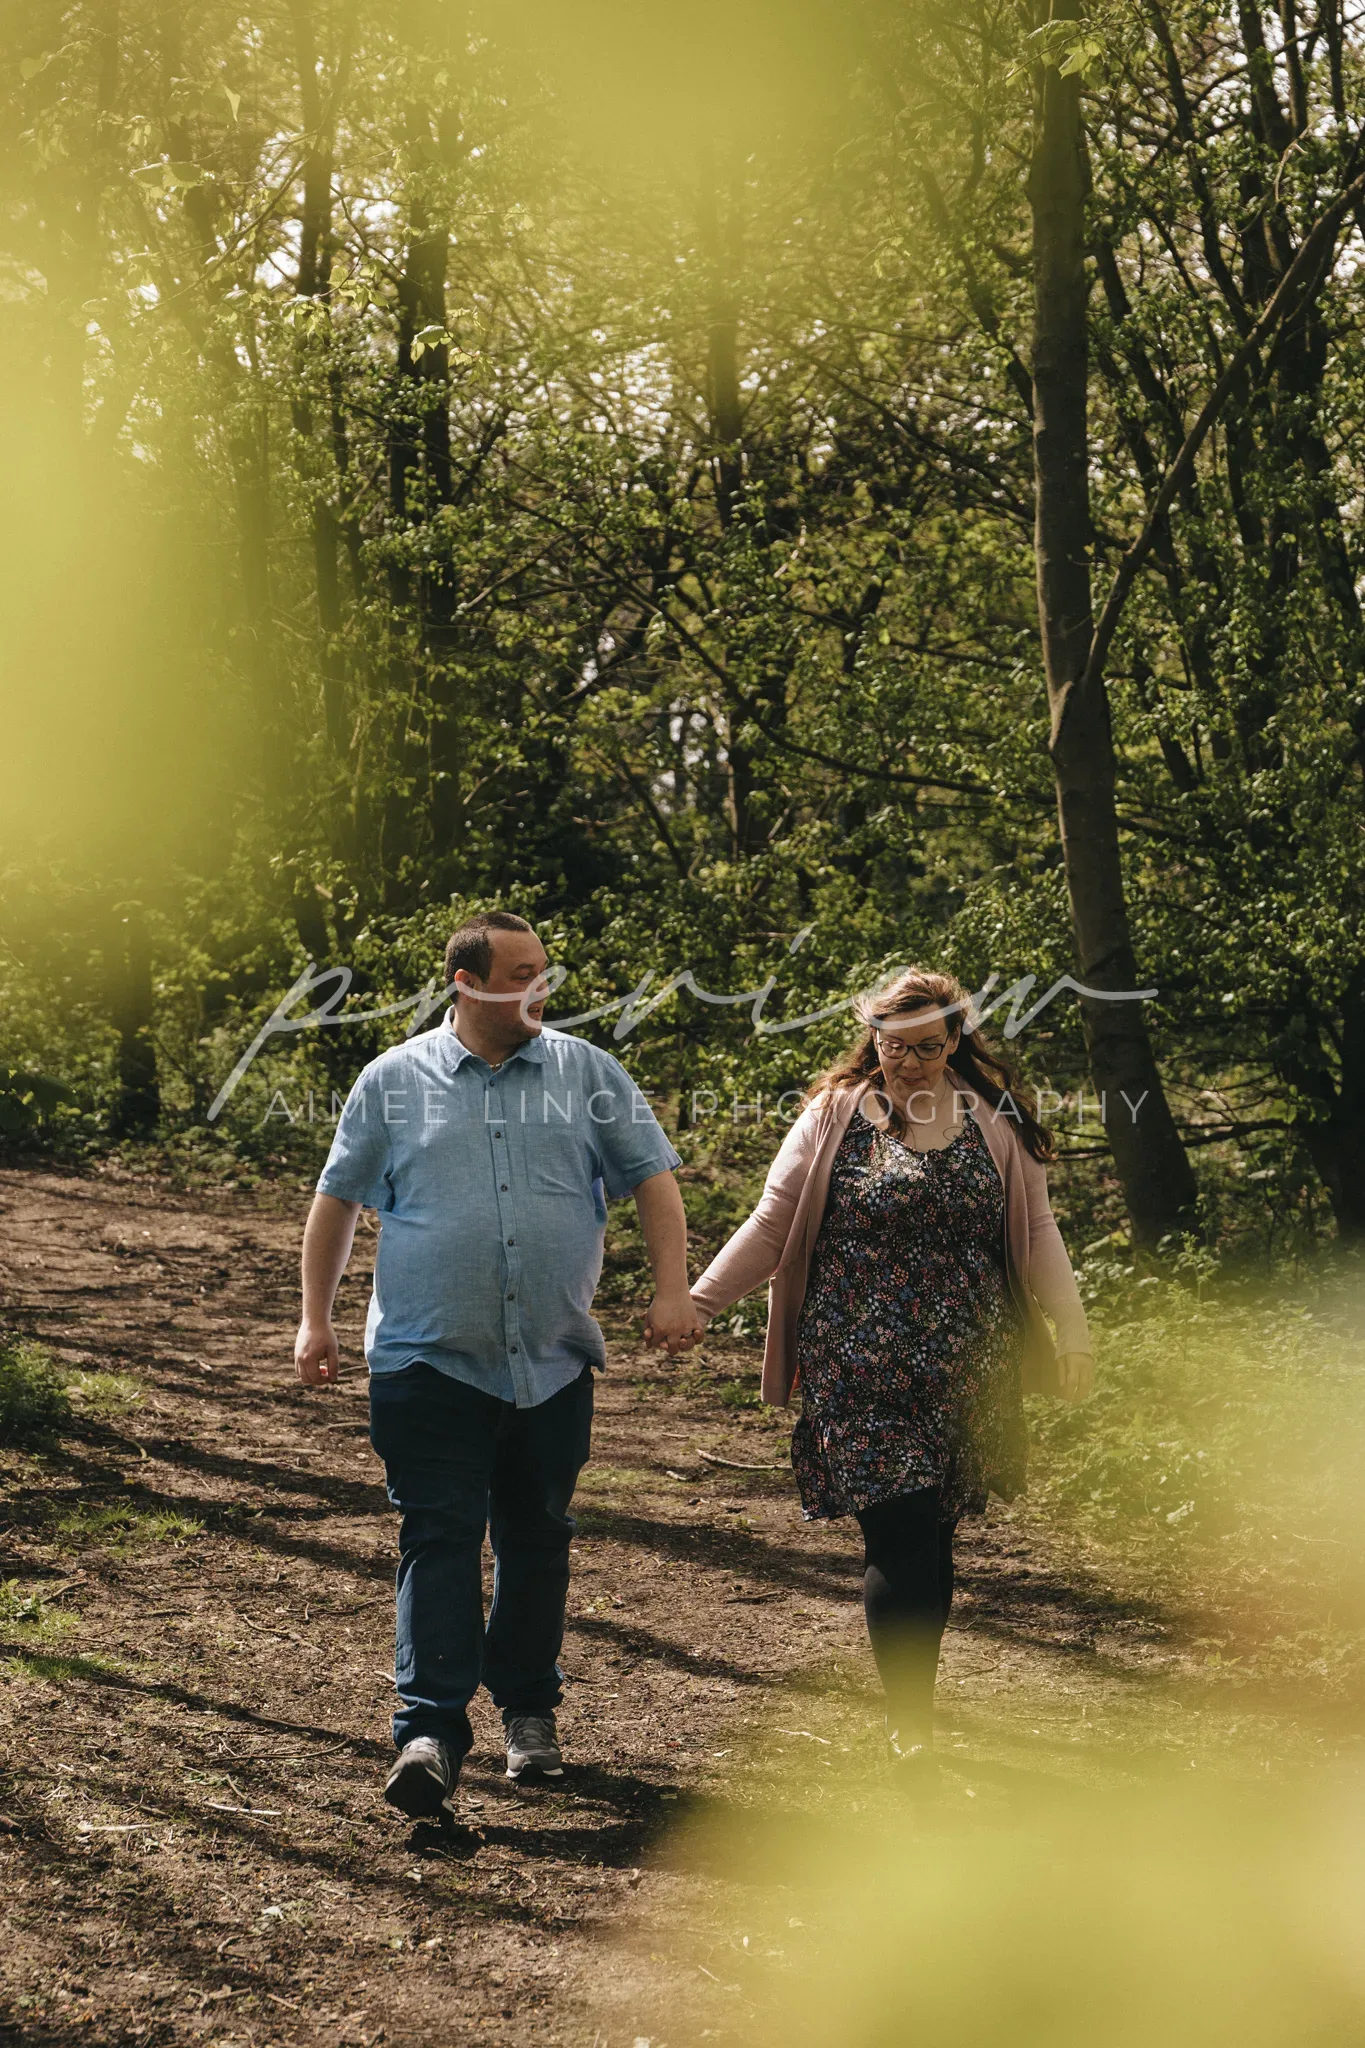 A couple holding hands and walking on a sunlit forest path. Ashley, wearing a floral dress, and the man, in a blue shirt and jeans, smile as they walk. Sunlight filters through